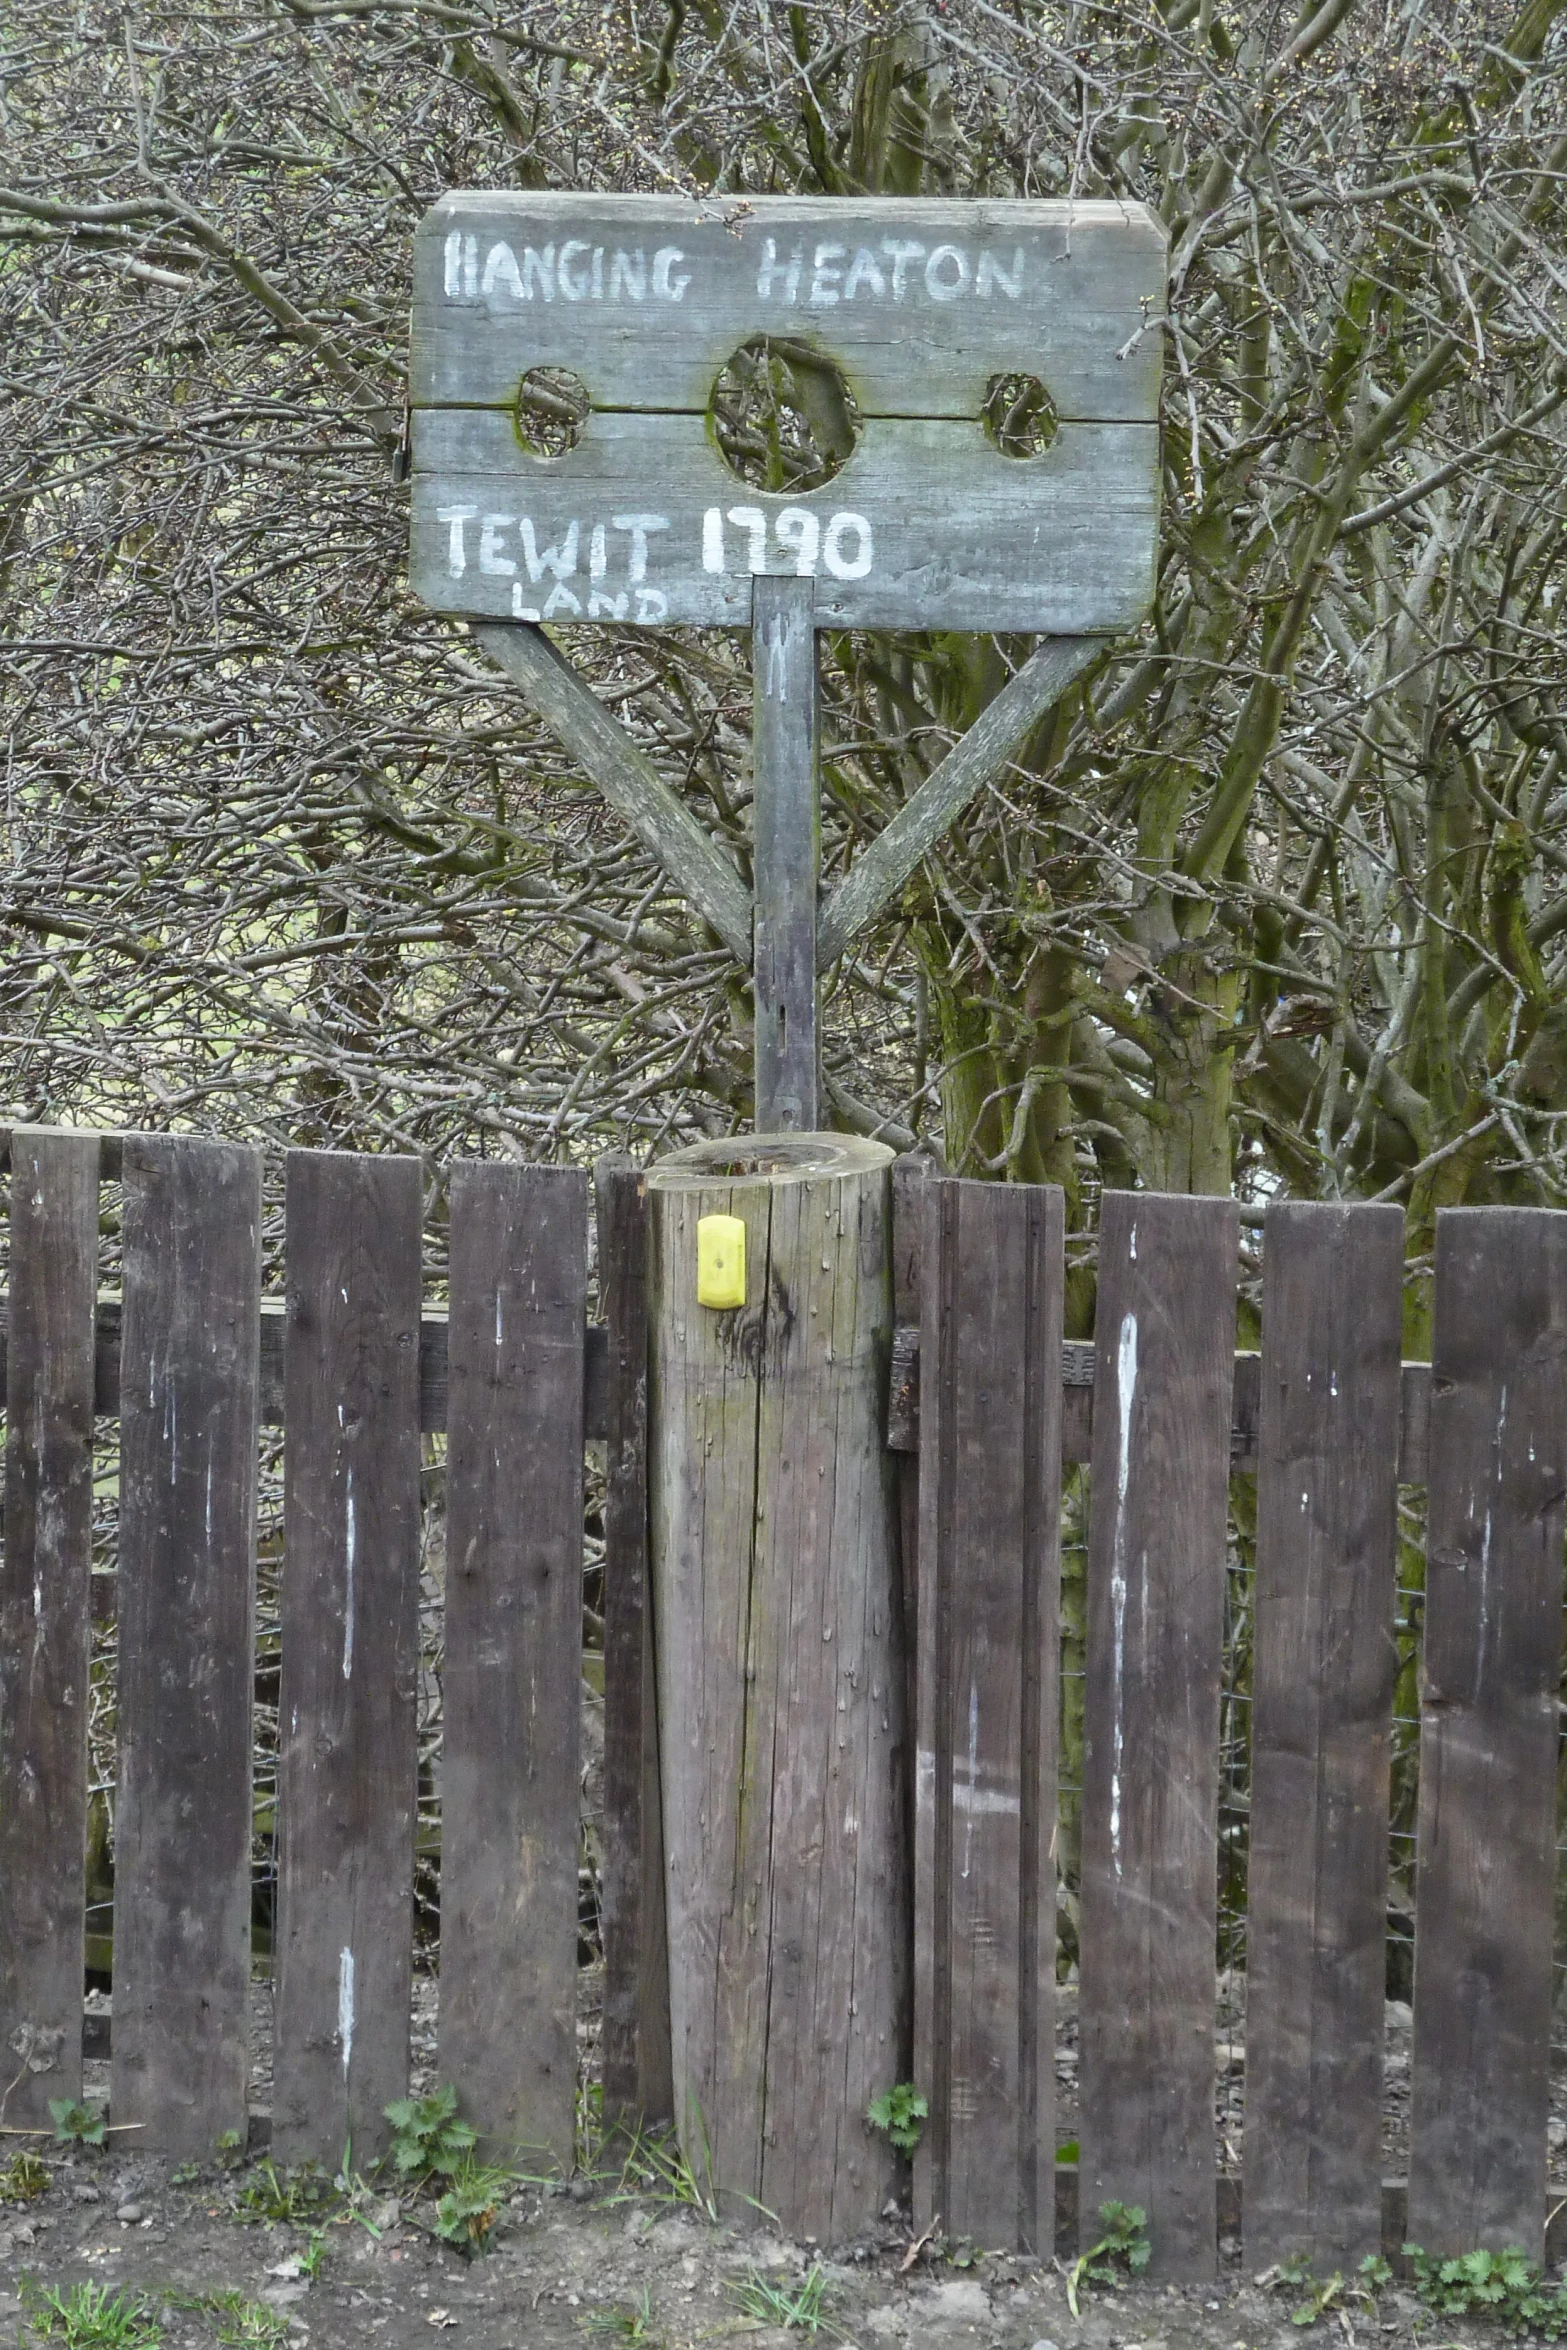 a wooden fence surrounds a wooden fence and an old looking sign